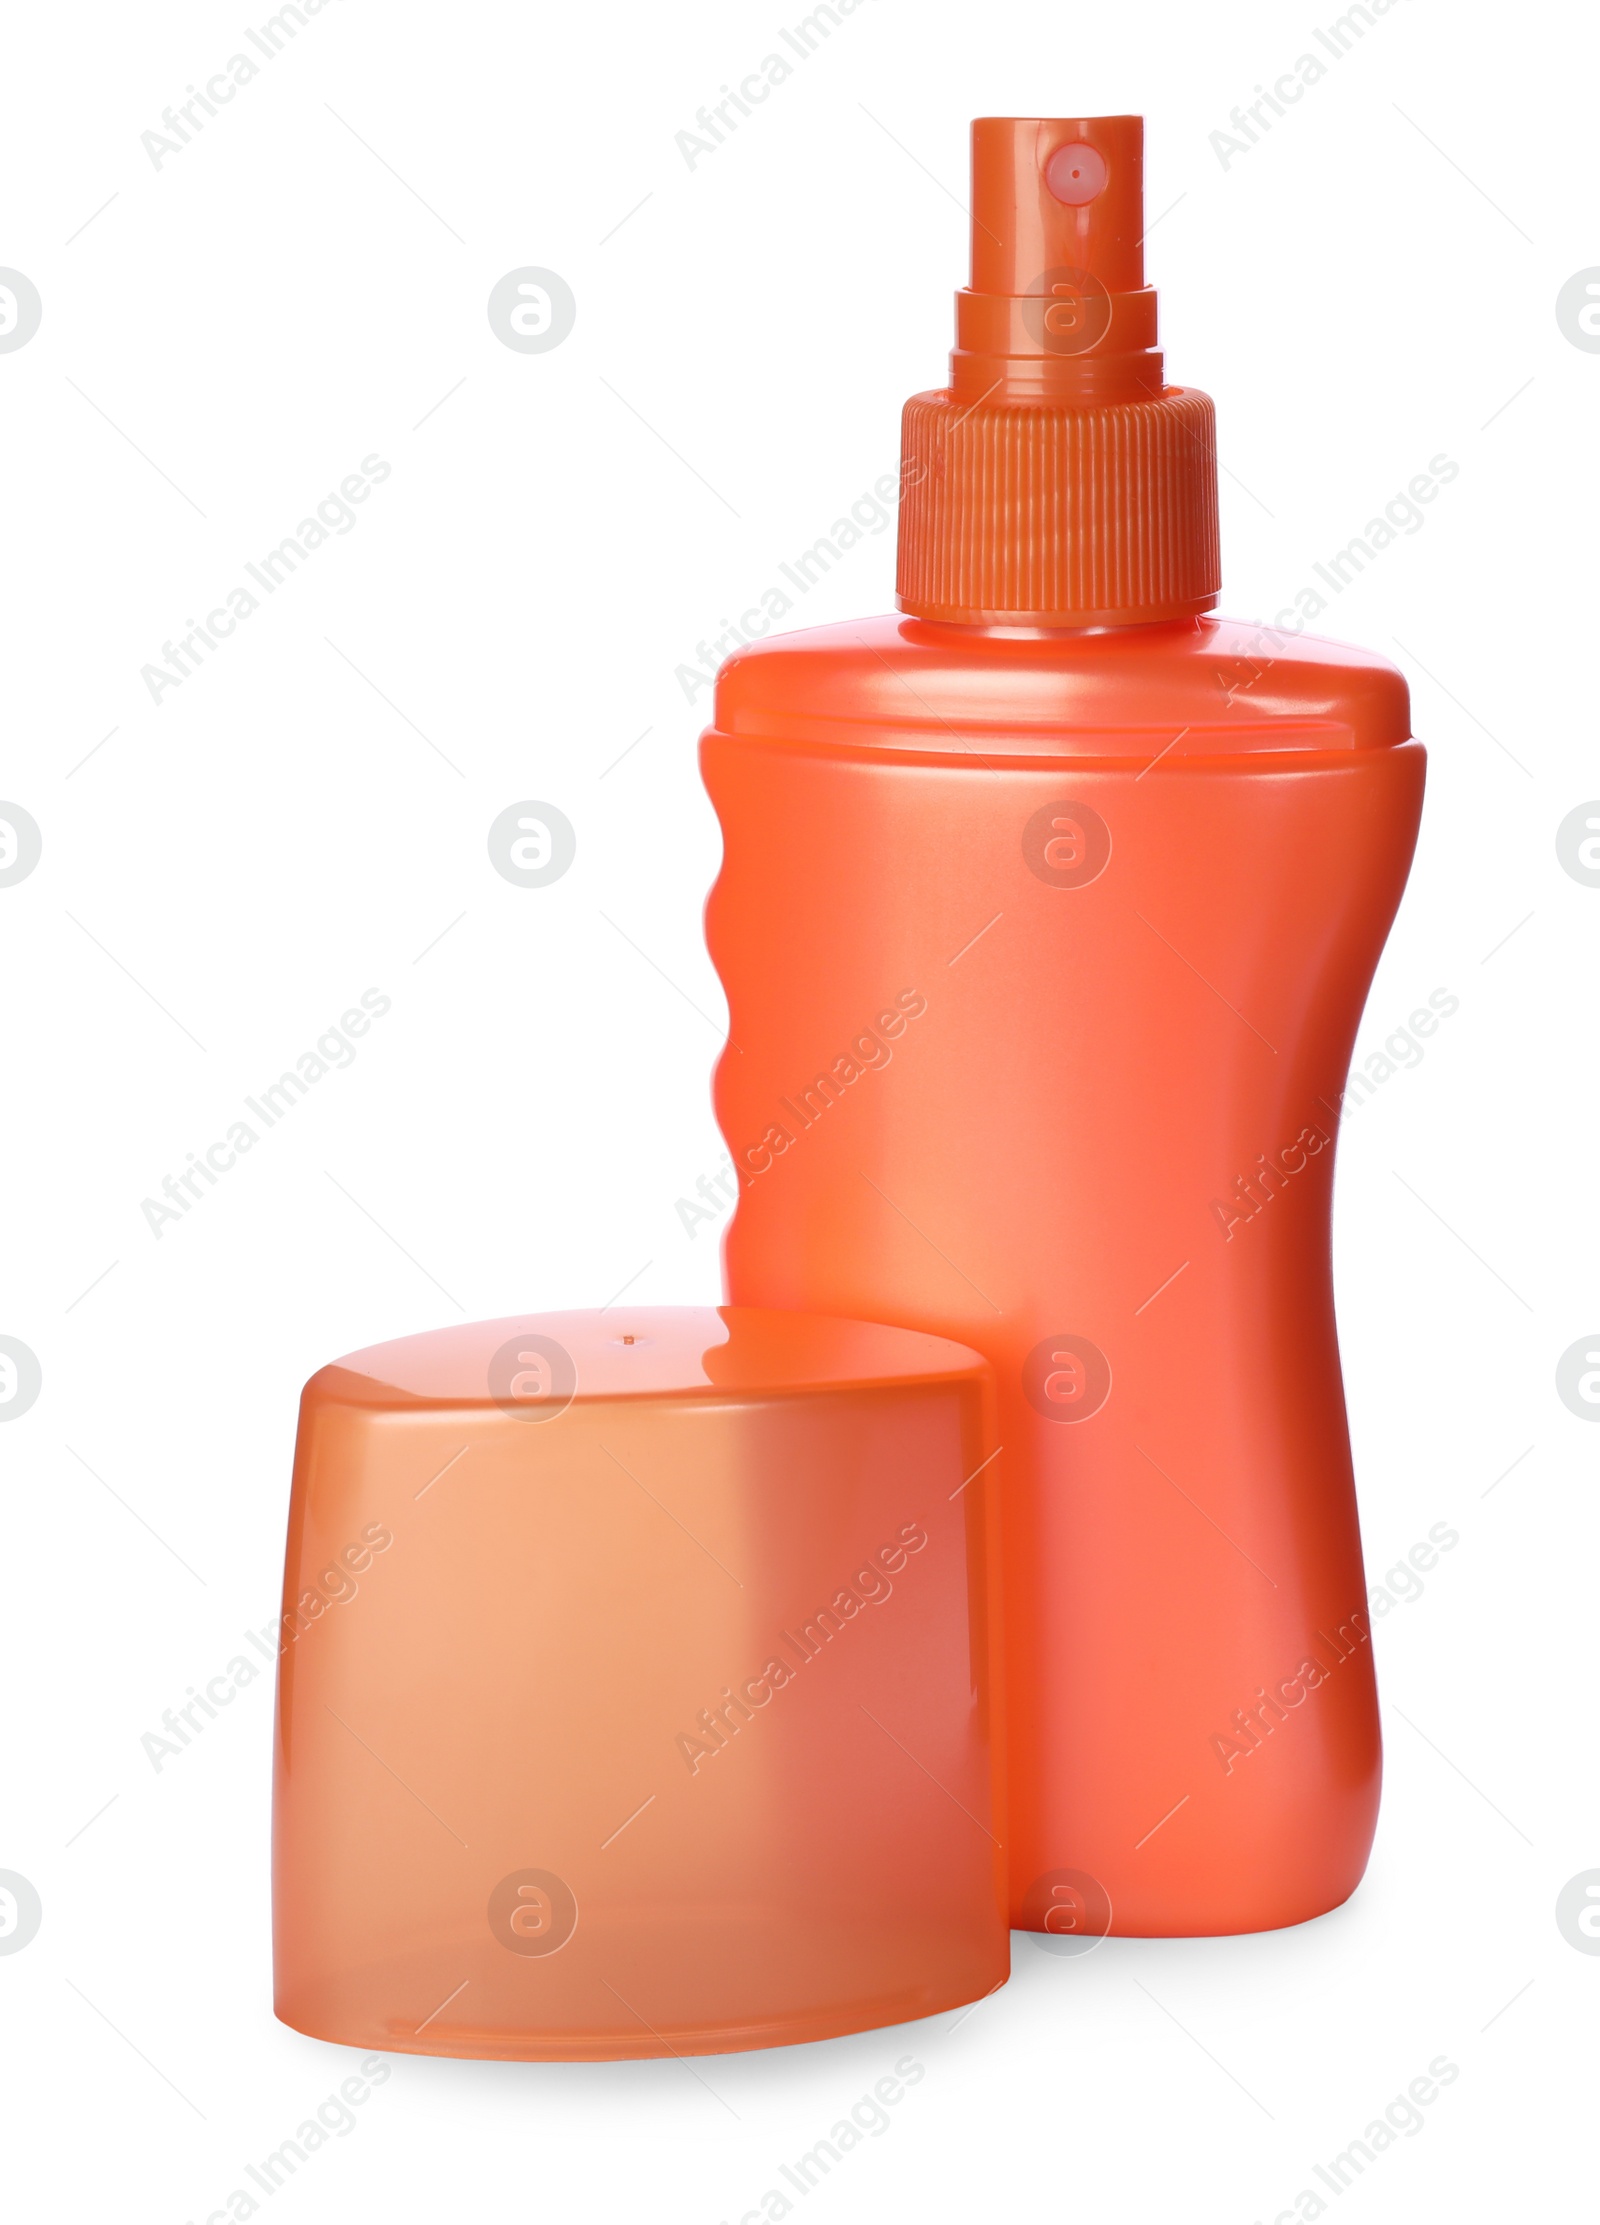 Photo of Bottle with sun protection spray isolated on white